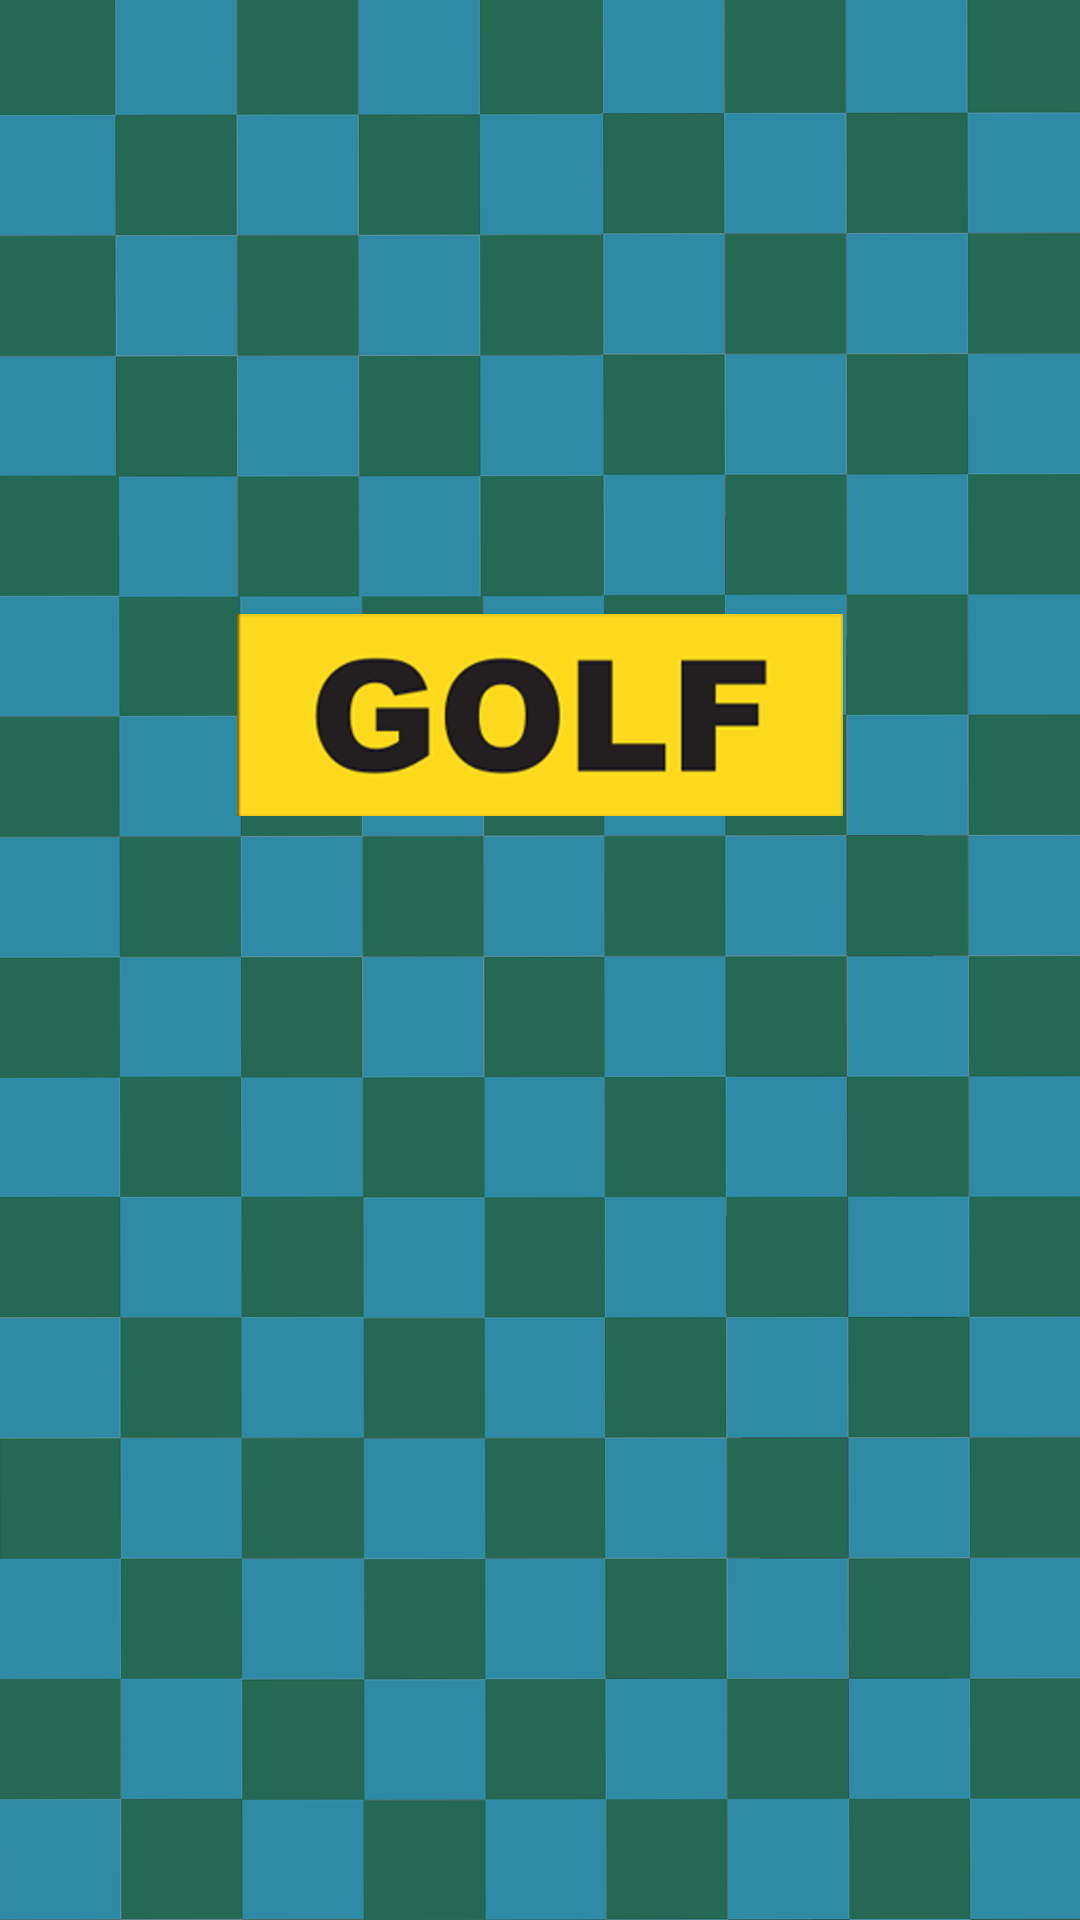 Made a phone wallpaper out of the yellow golf box logo. feel free